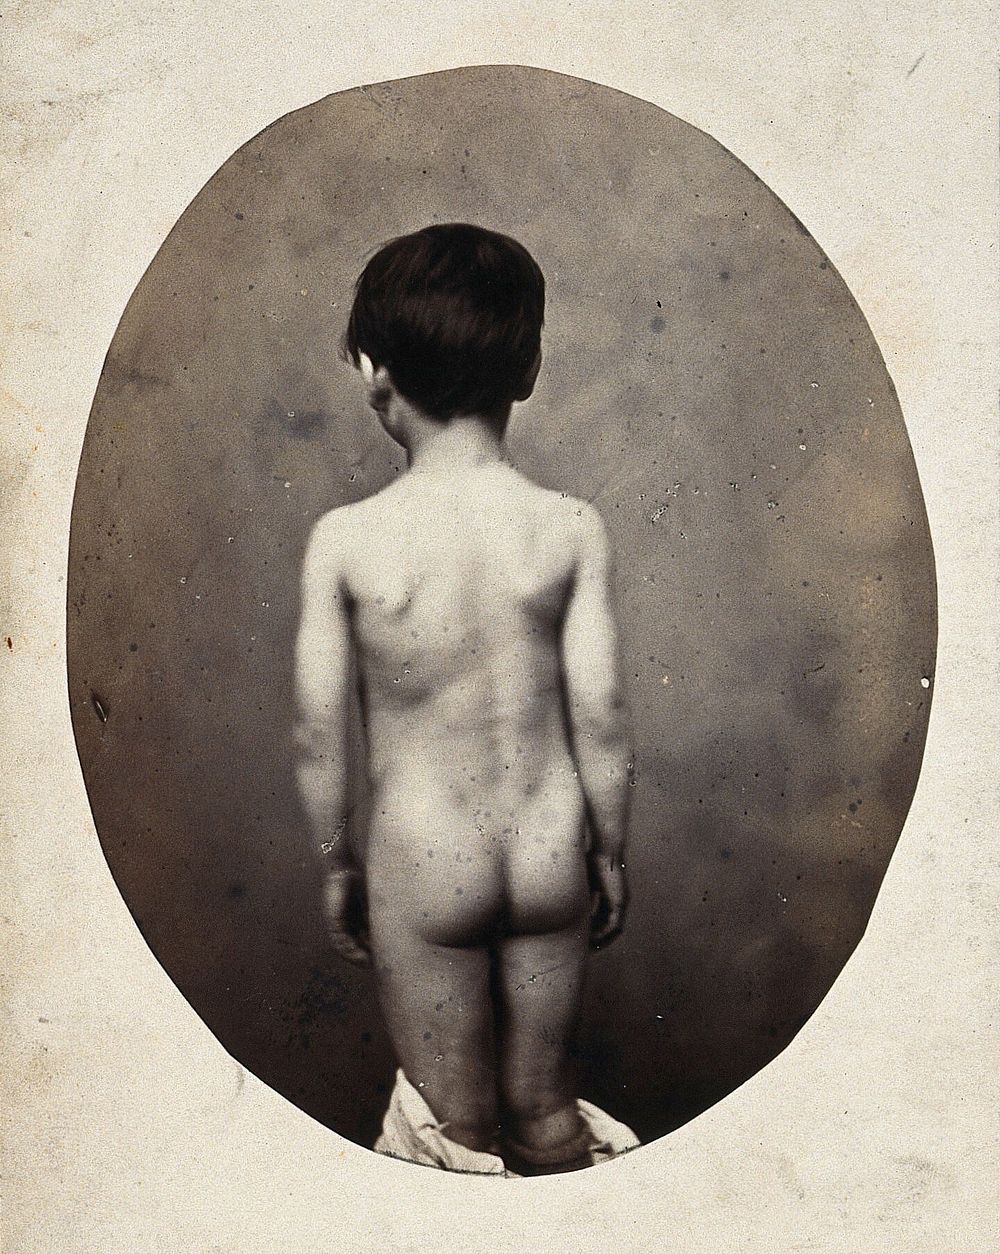 A standing child, naked, viewed from behind; his shoulders are uneven. Photograph by L. Haase after H.W. Berend, c. 1865.